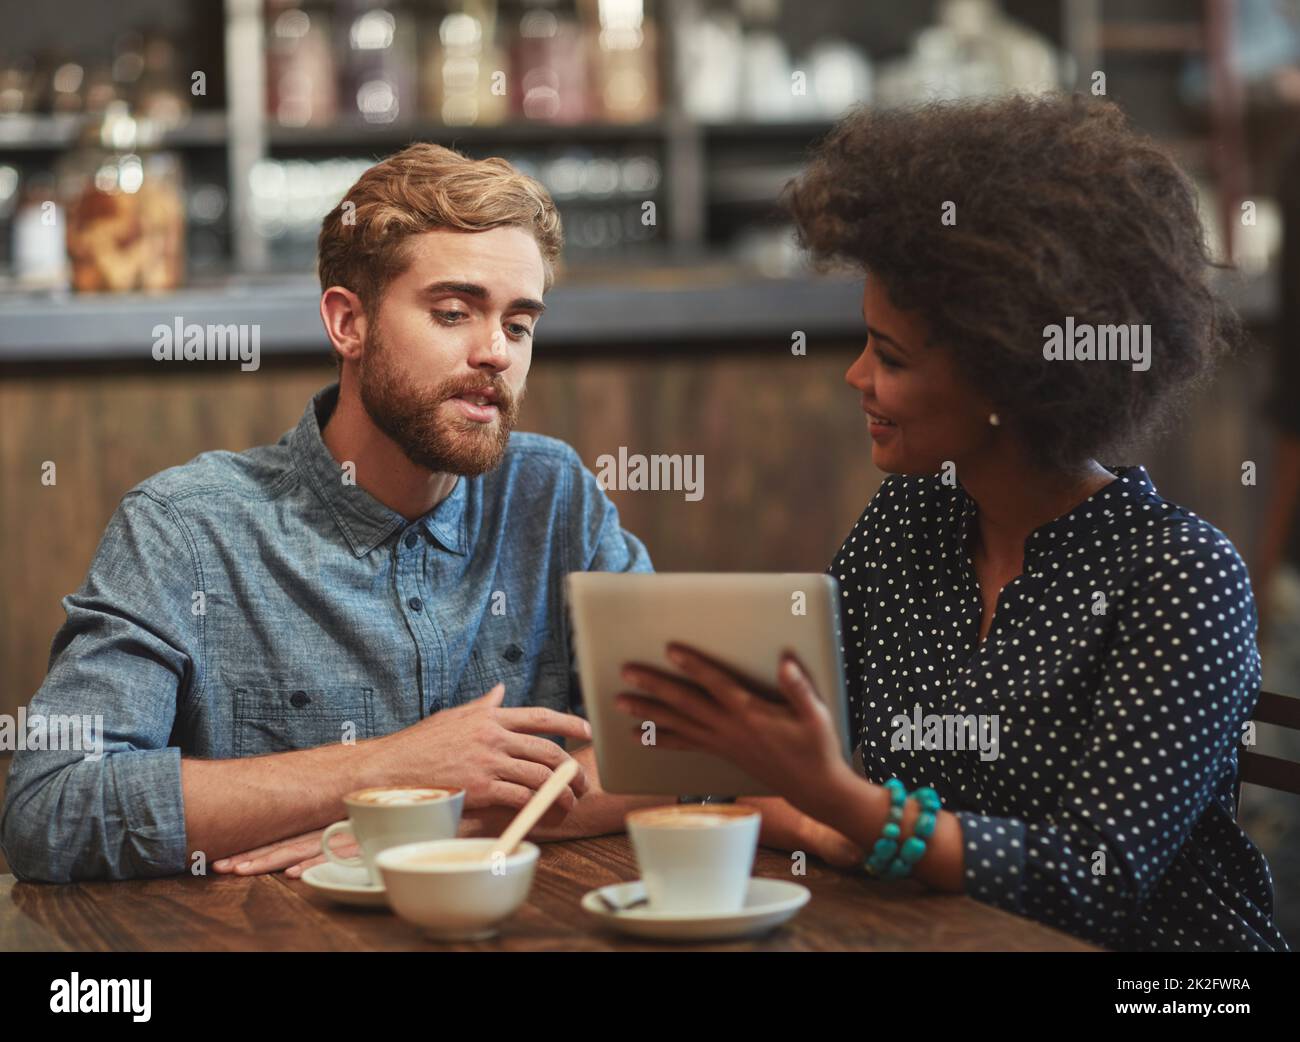 Discussing new ideas for their coffee shop. Shot of a young couple using a digital tablet together on a coffee date. Stock Photo